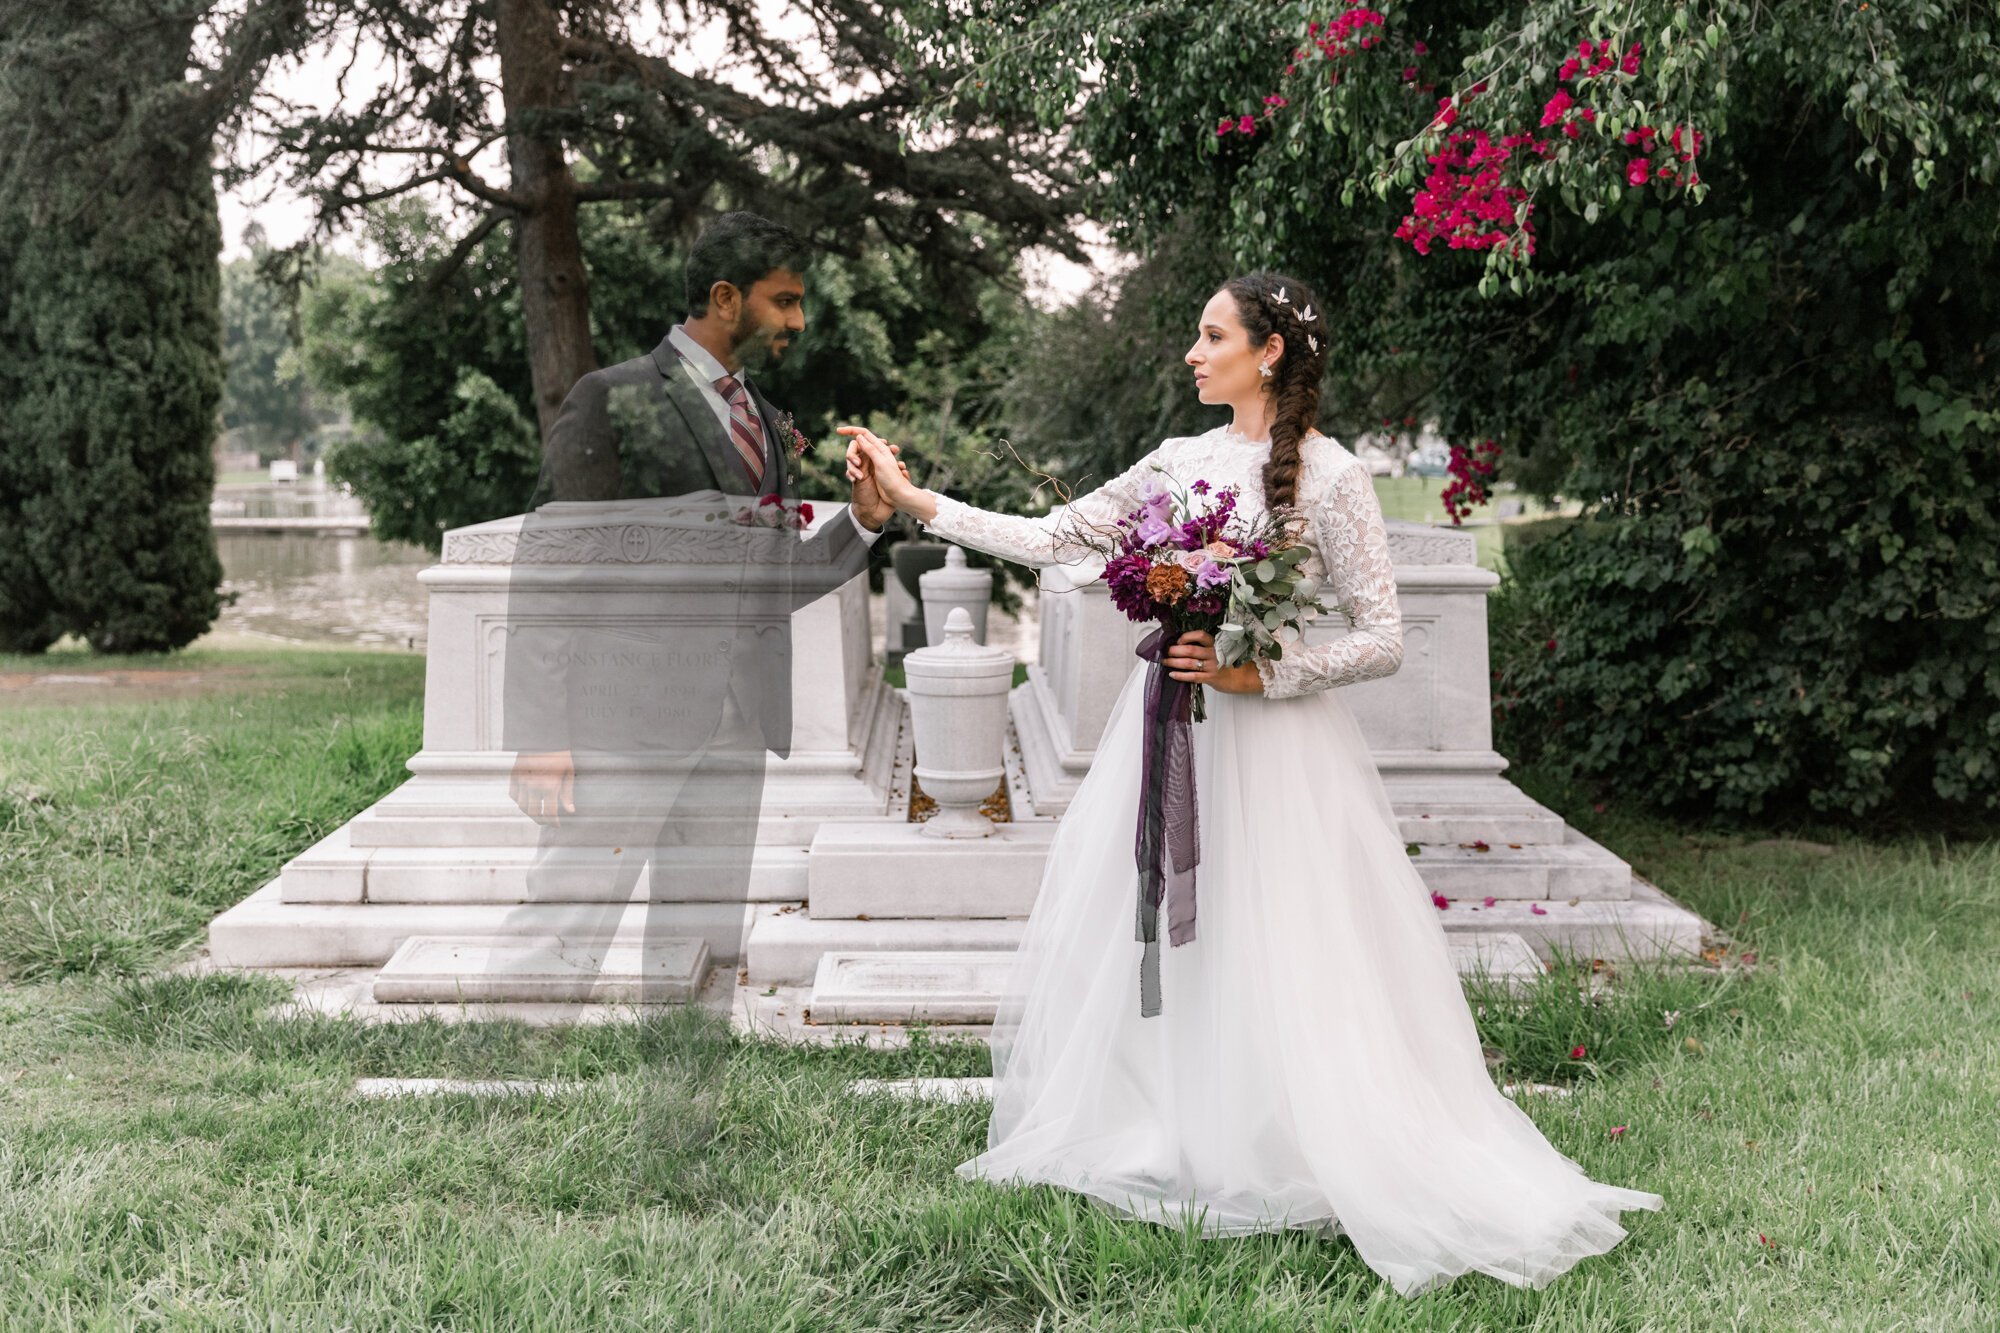 www.santabarbarawedding.com | Veils &amp; Tails Photography | Styled Bride and Groom in Cemetery